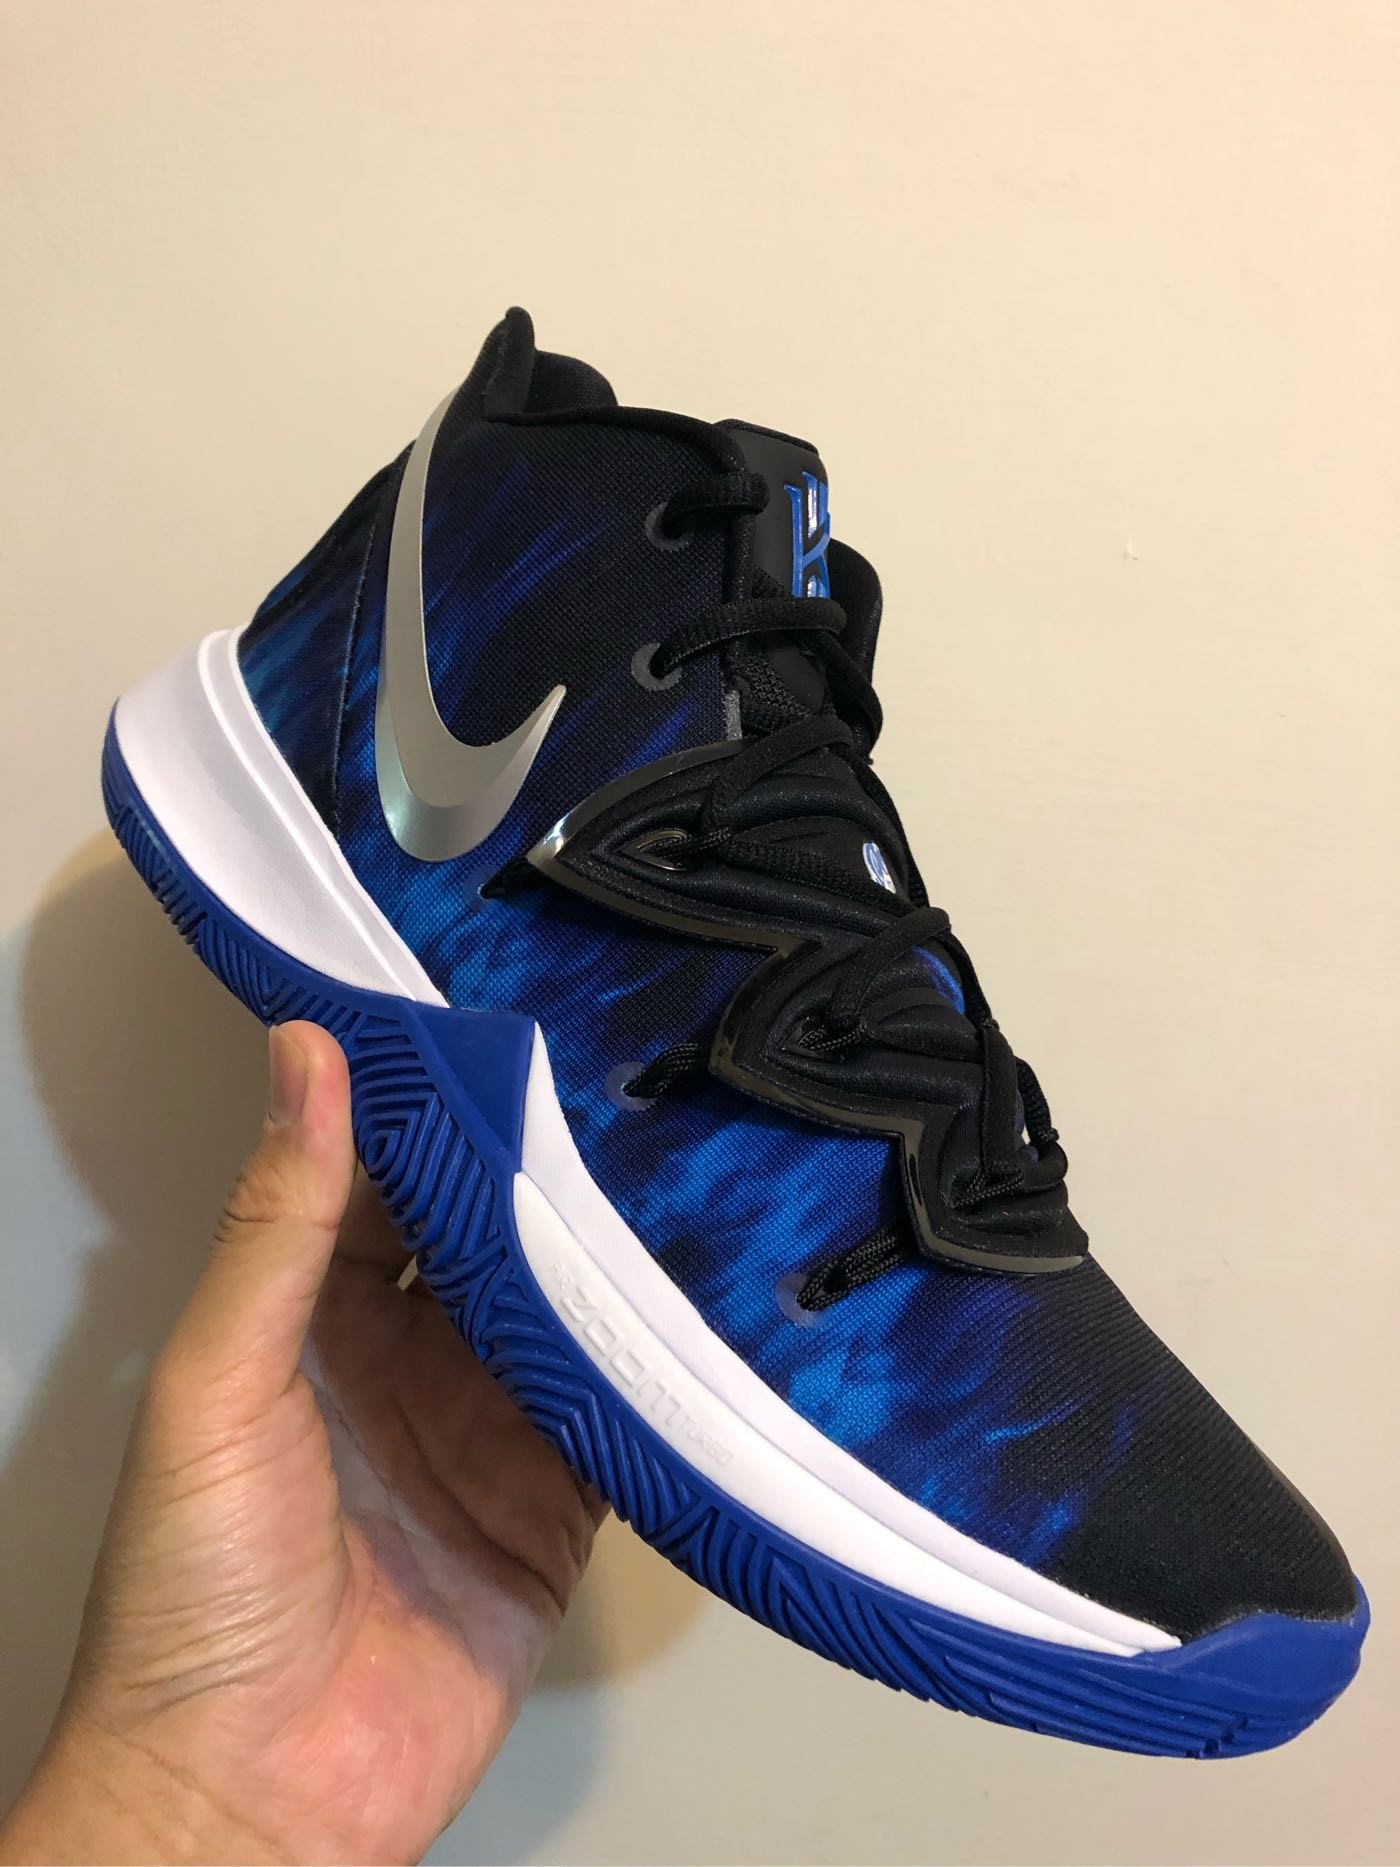 NIKE KYRIE 5 'CHINESE NEW YEAR' 2019 Stay Fresh